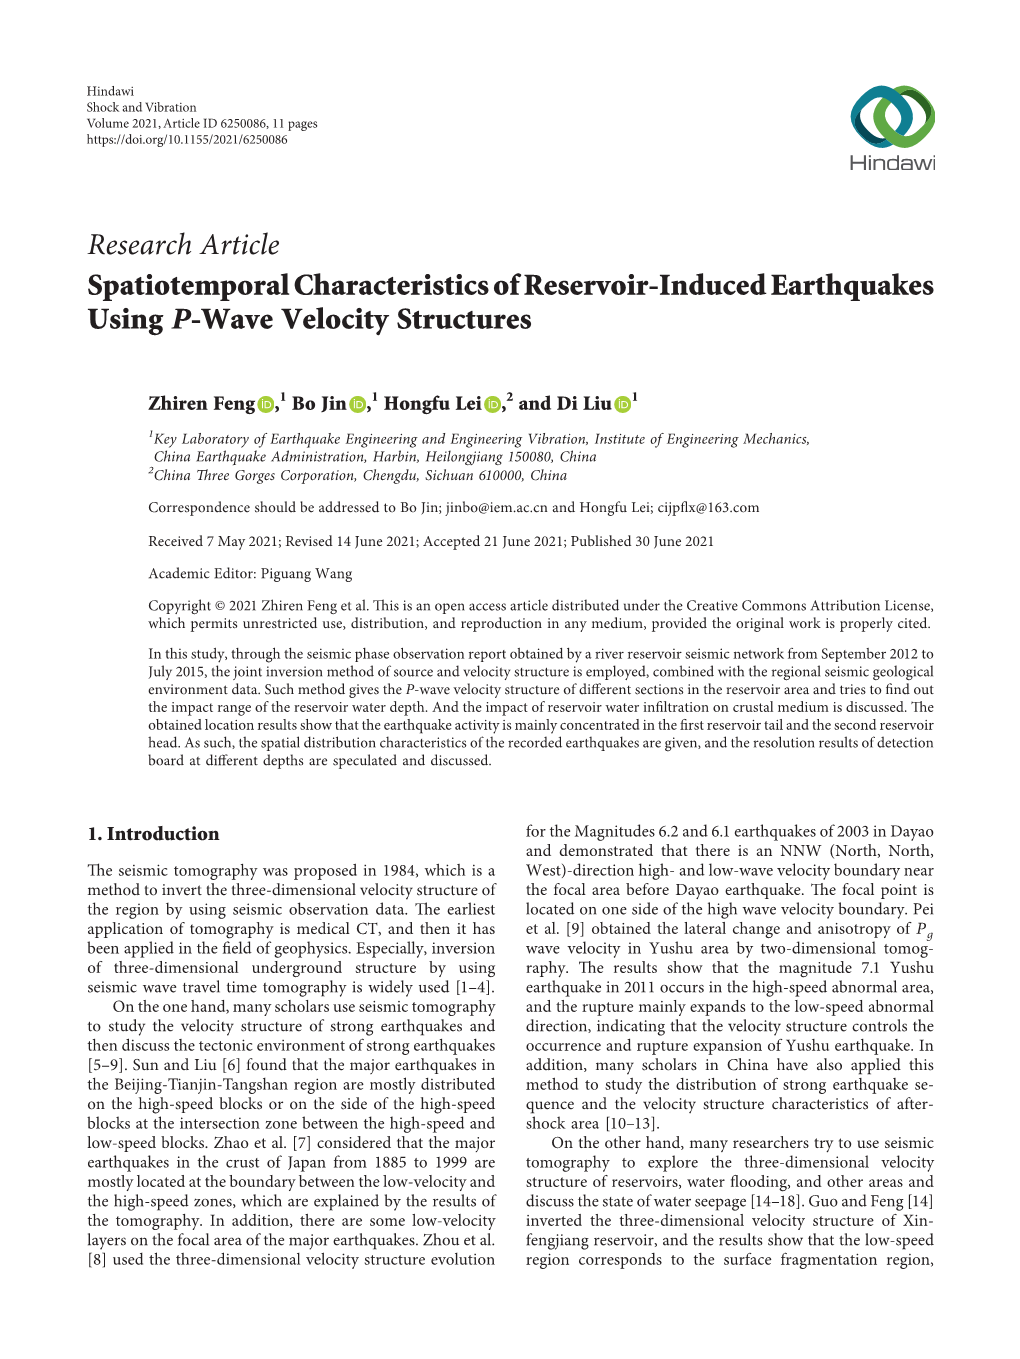 Spatiotemporal Characteristics of Reservoir-Induced Earthquakes Using P-Wave Velocity Structures